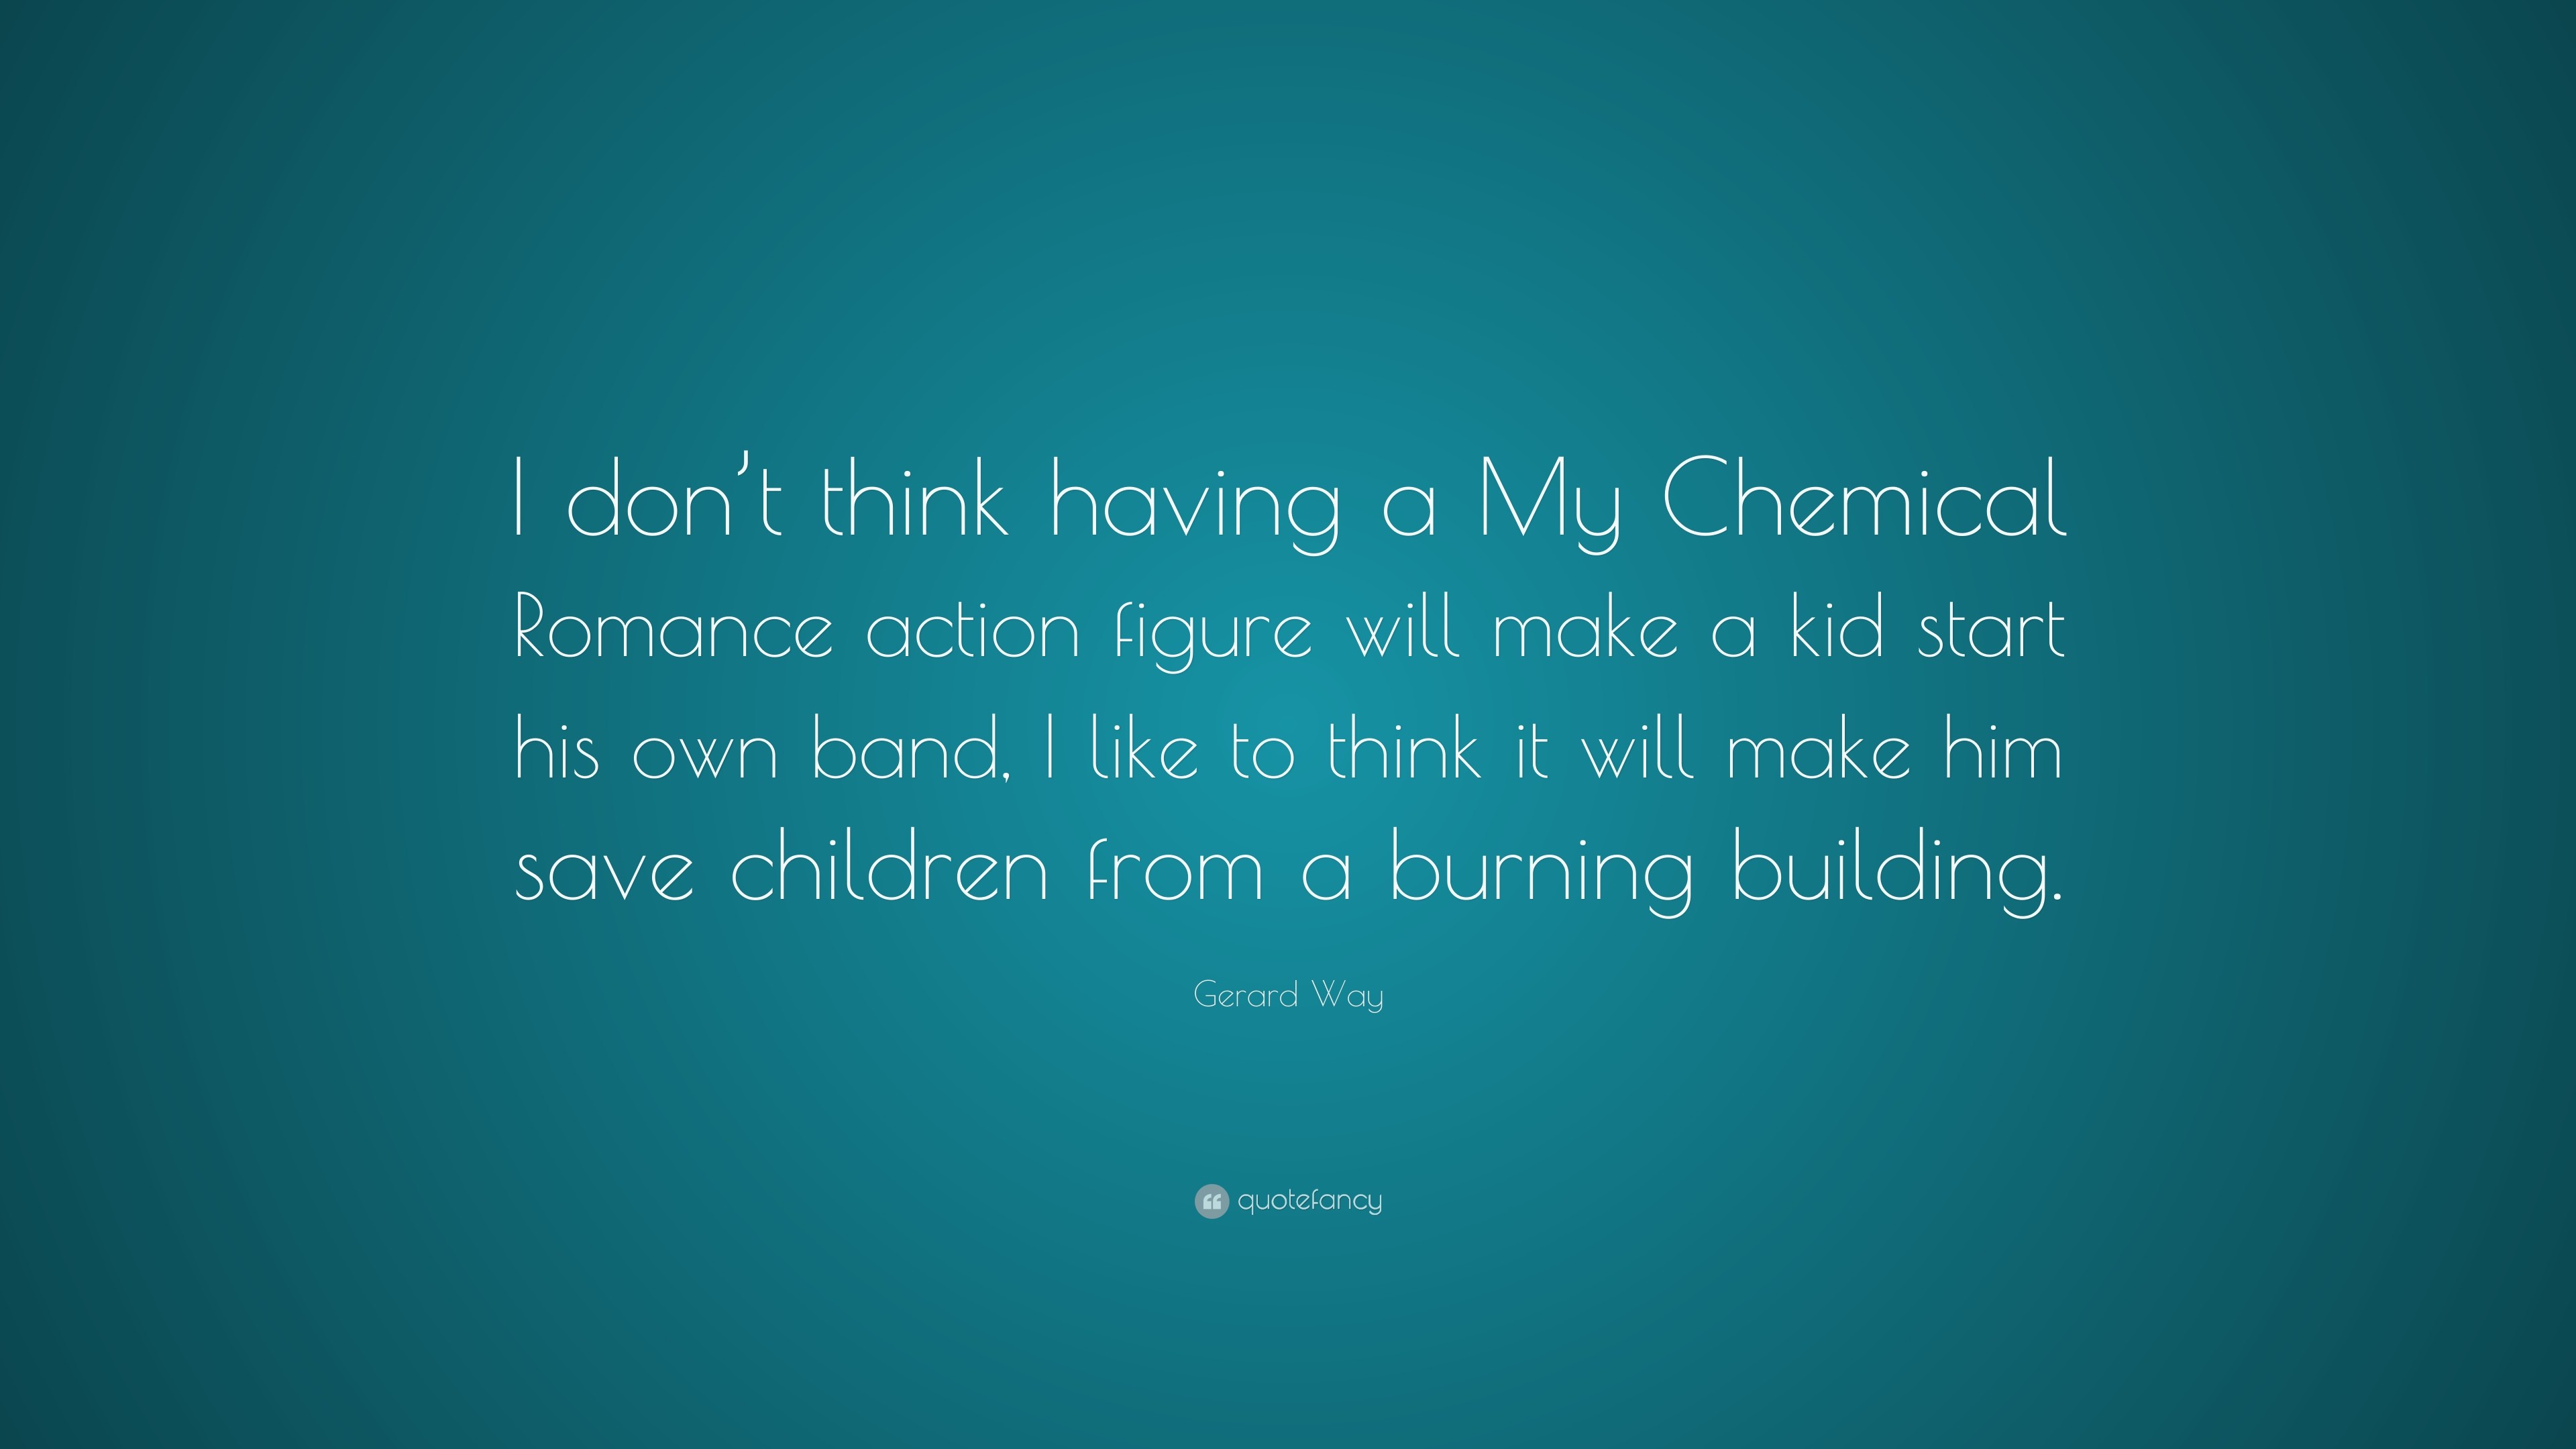 Gerard Way Quote: “I don't think having a My Chemical Romance action